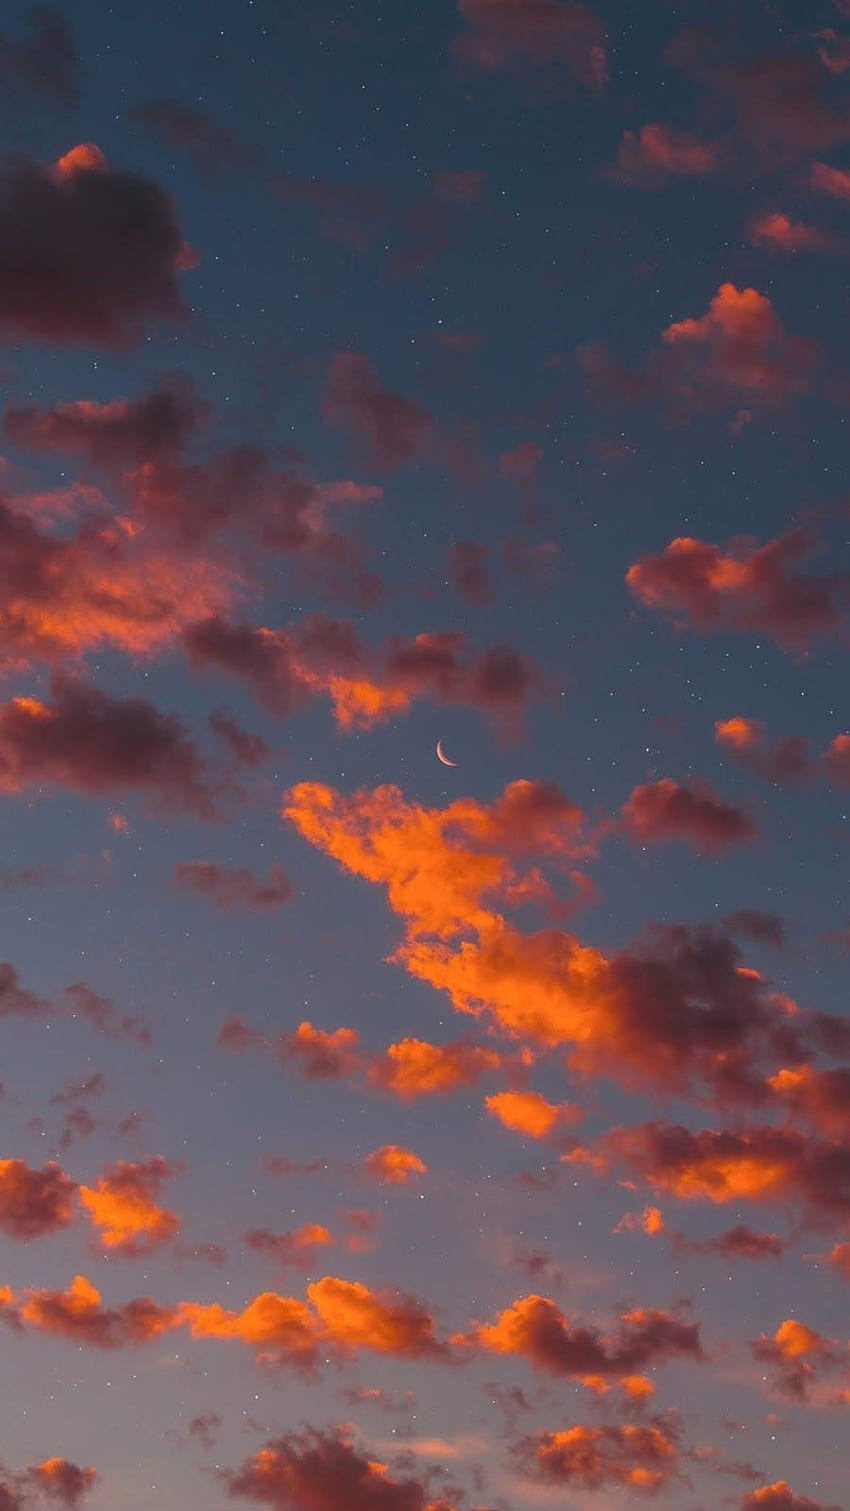 List of Best Orange Anime IPhone Crescent moon in the sunset sky in 2020. Sky aesthetic, Aesthetic pastel , Aesthetic iphone, Orange Cloud HD phone wallpaper